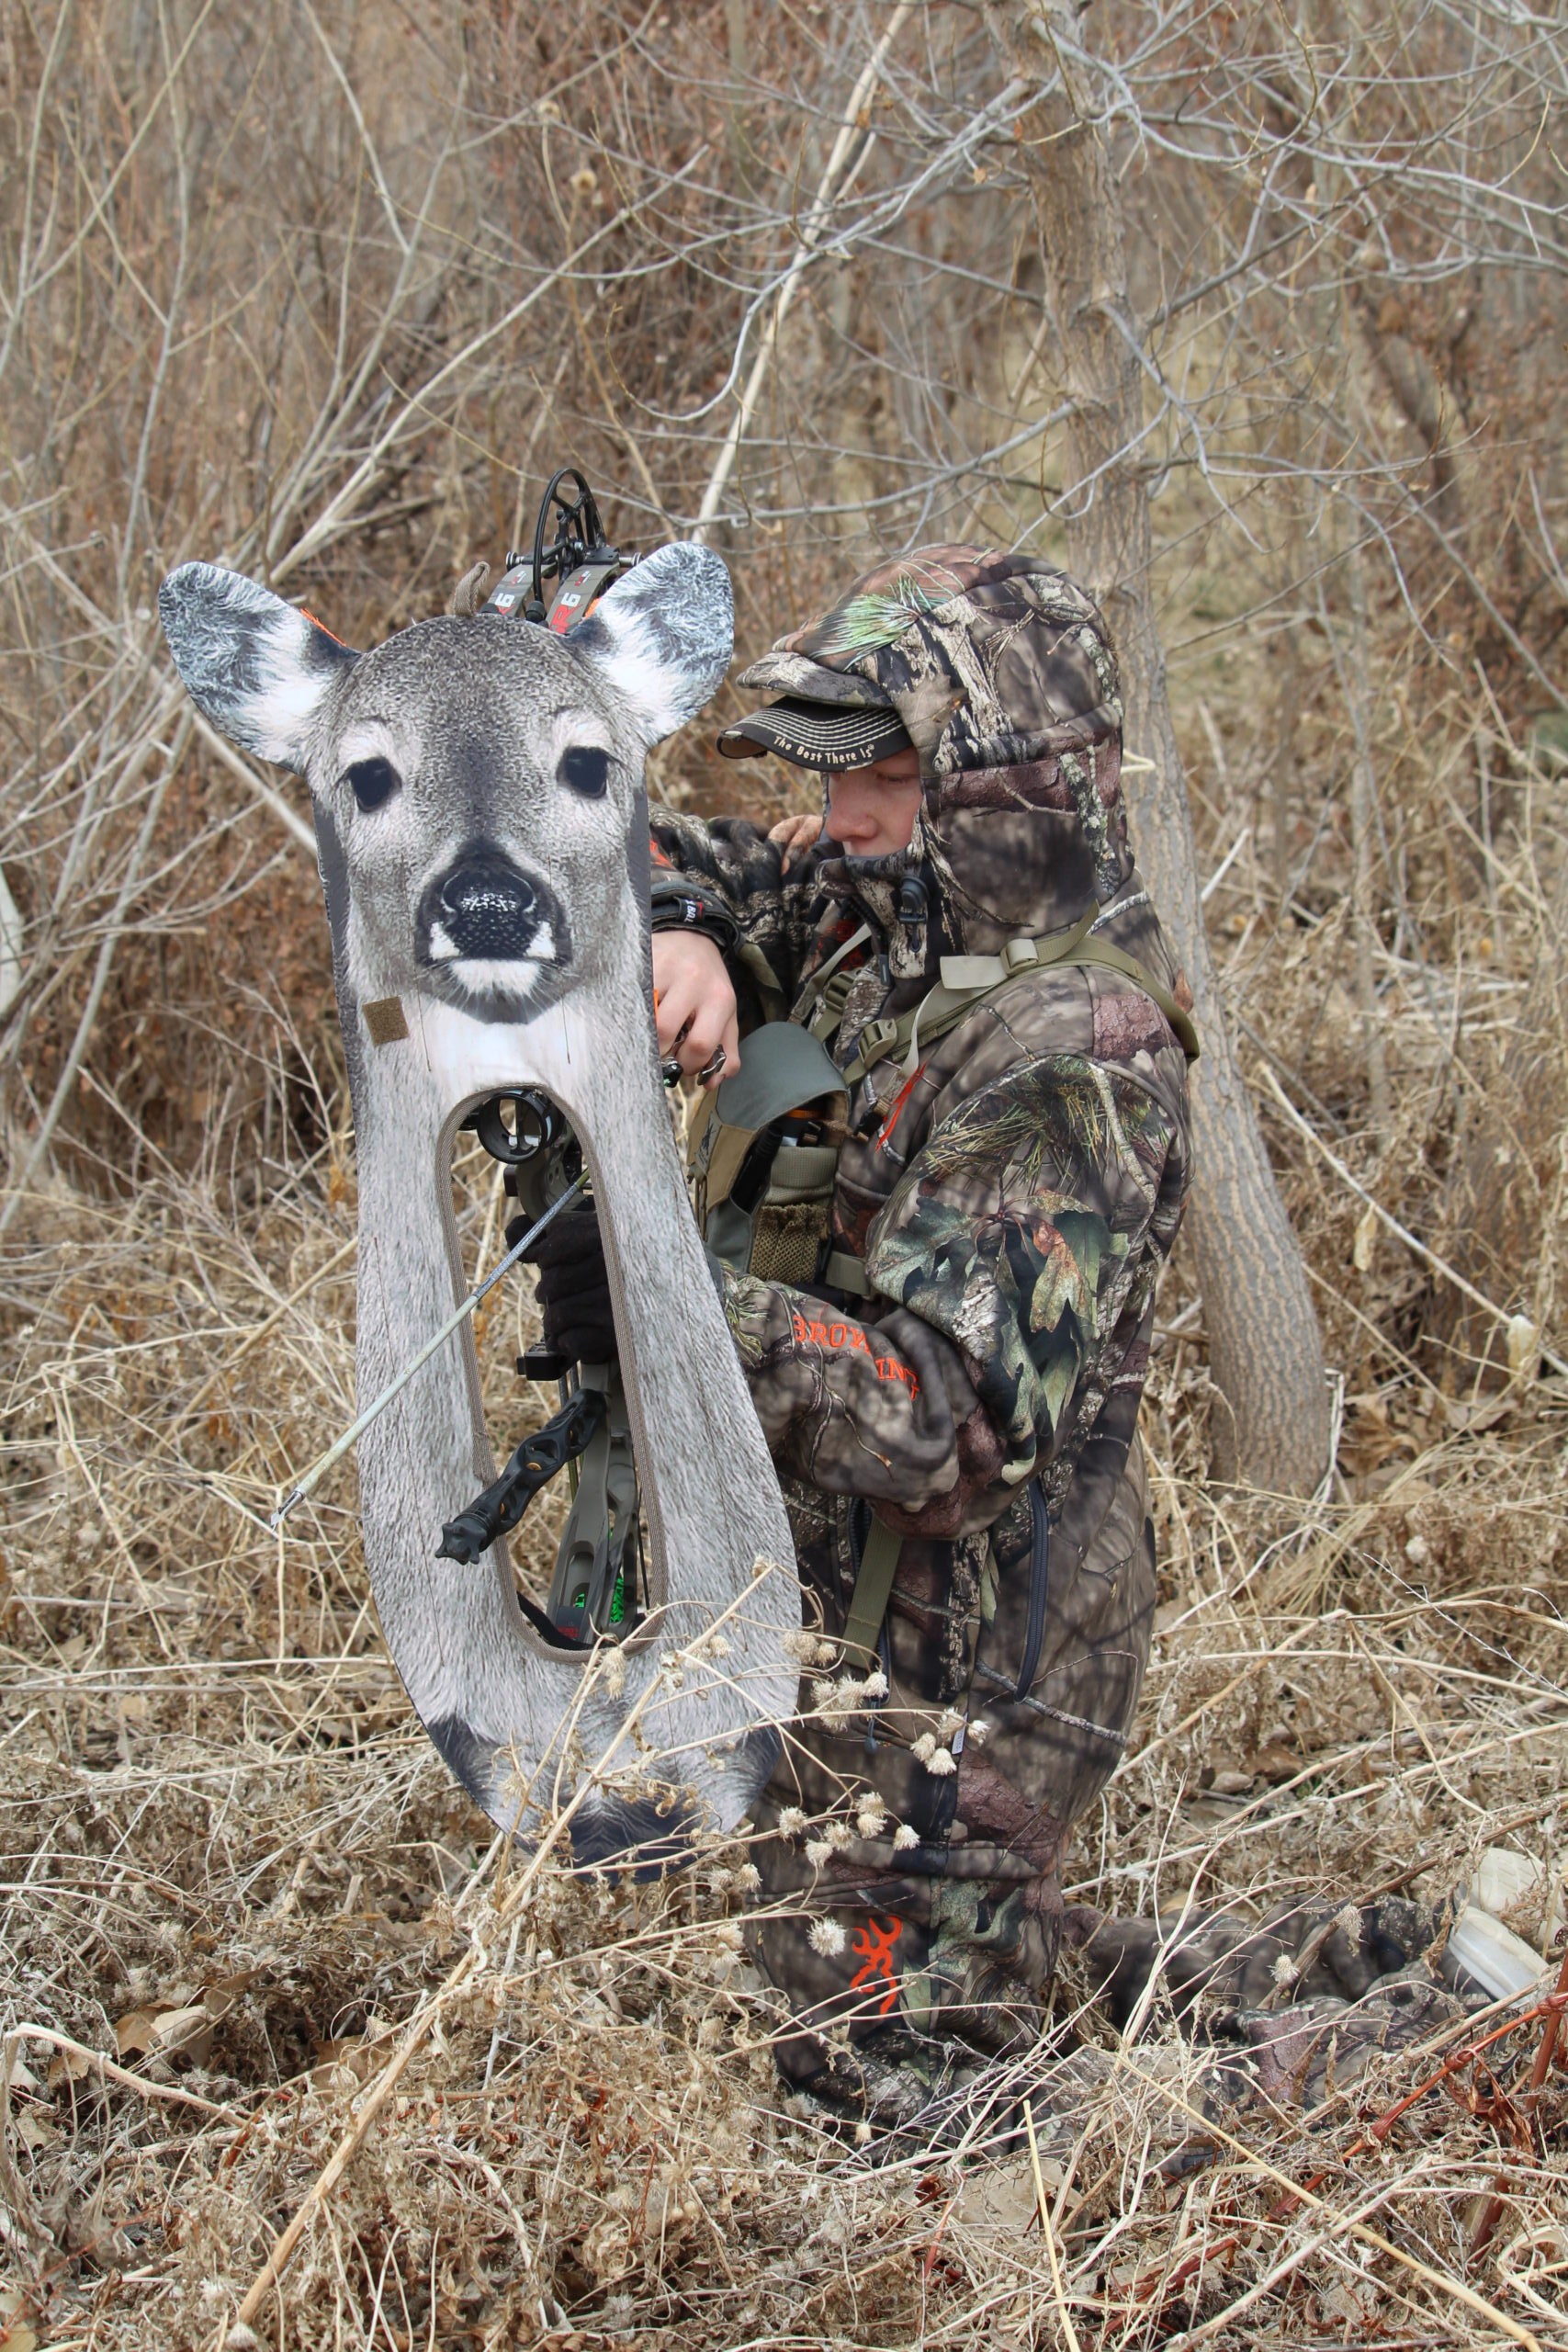 A decoy can be incredubly effective on rutting deer.